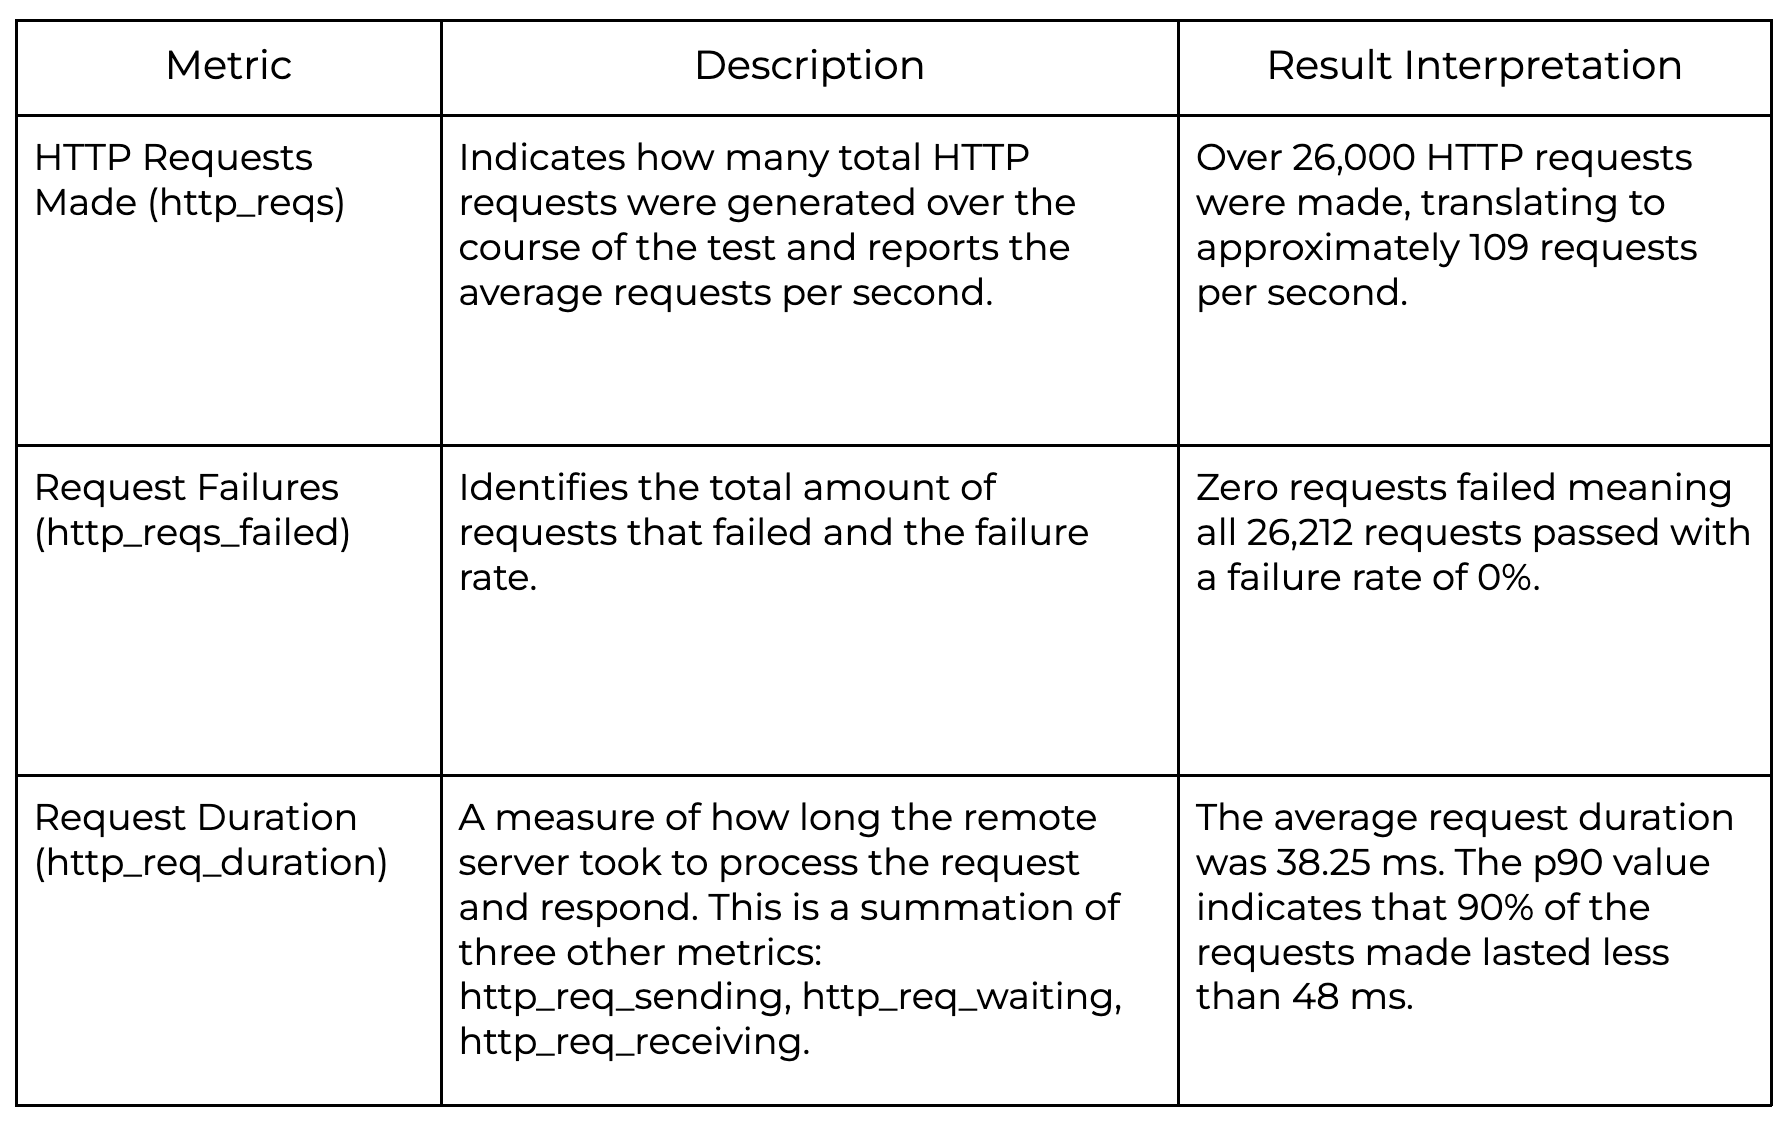 Figure 1.8 Explanation of some key metrics from the test results output in Figure 1.7.